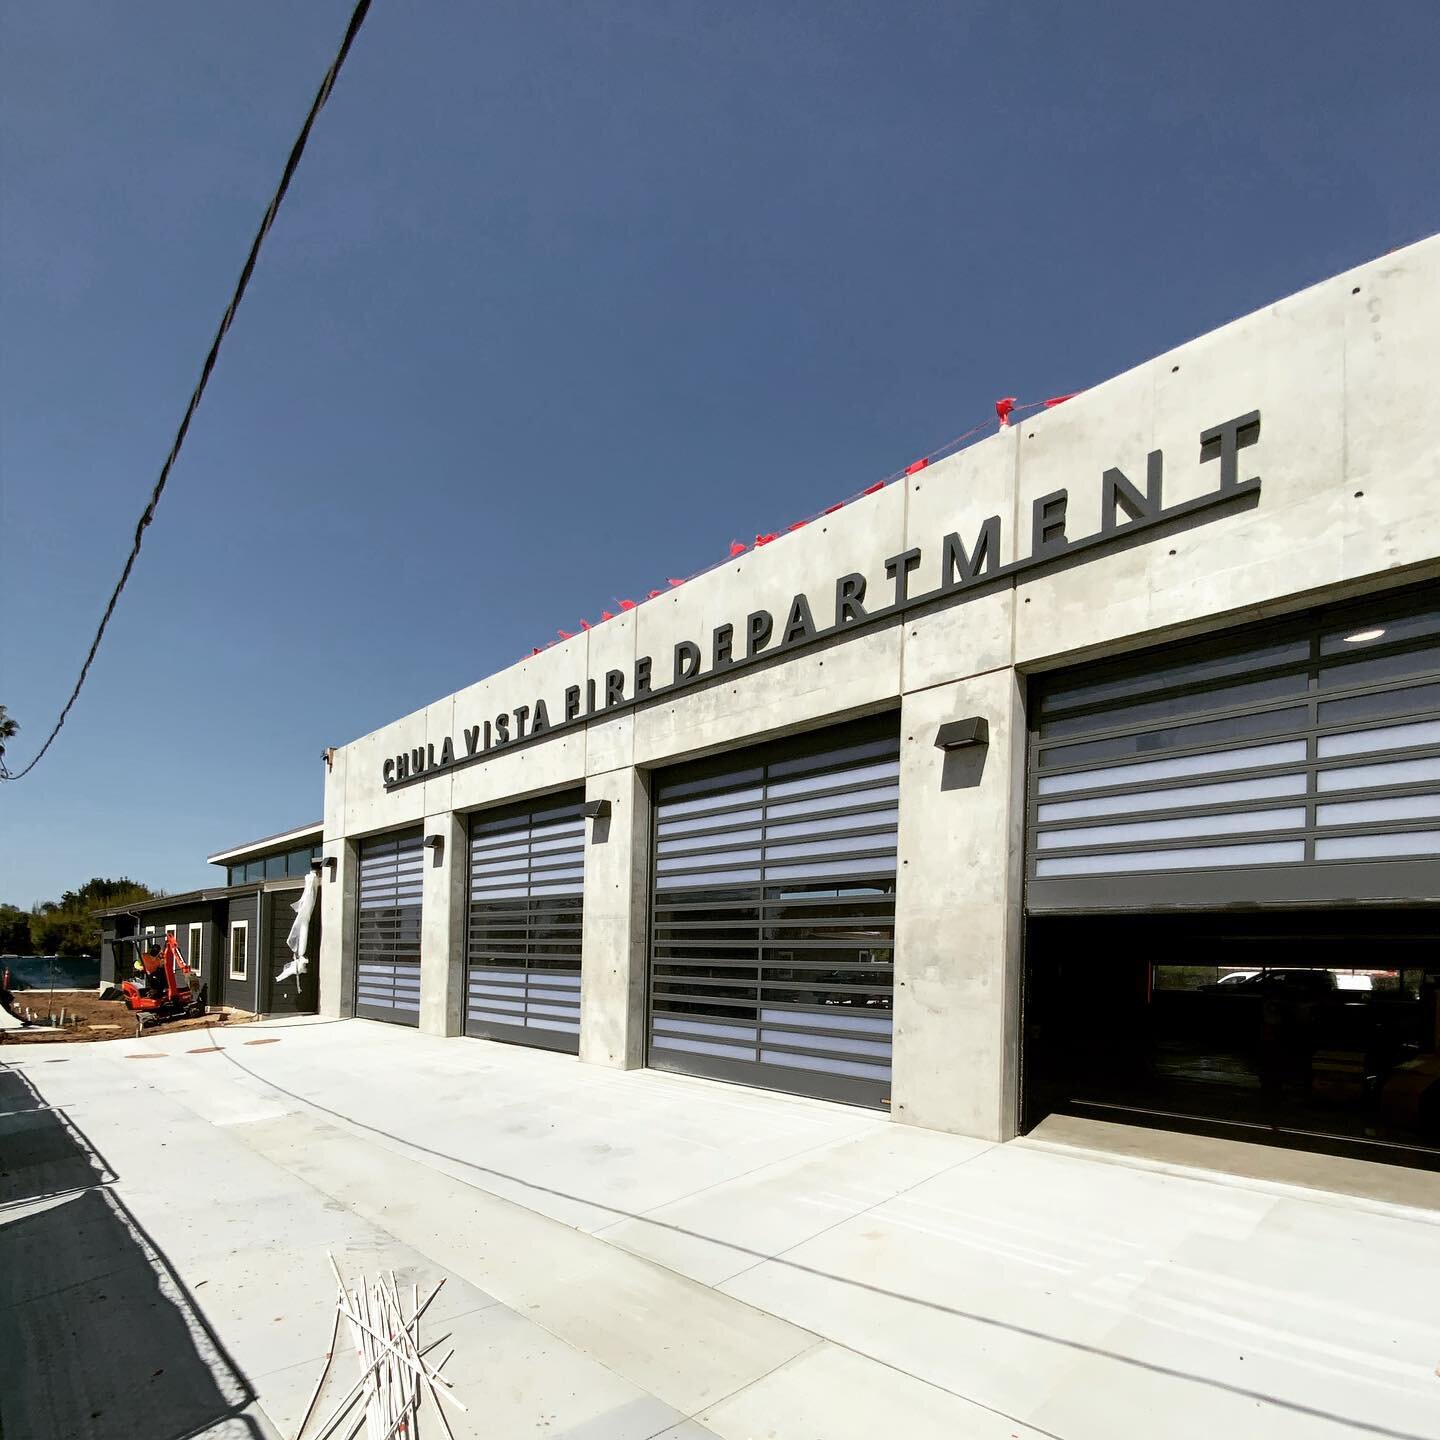 Final stage of @chulavistafiredepartment #9 .Almost all cleaned up and closed up i. Think the @chulavistafirefighters are going to like this one! #electricians #construction #chula